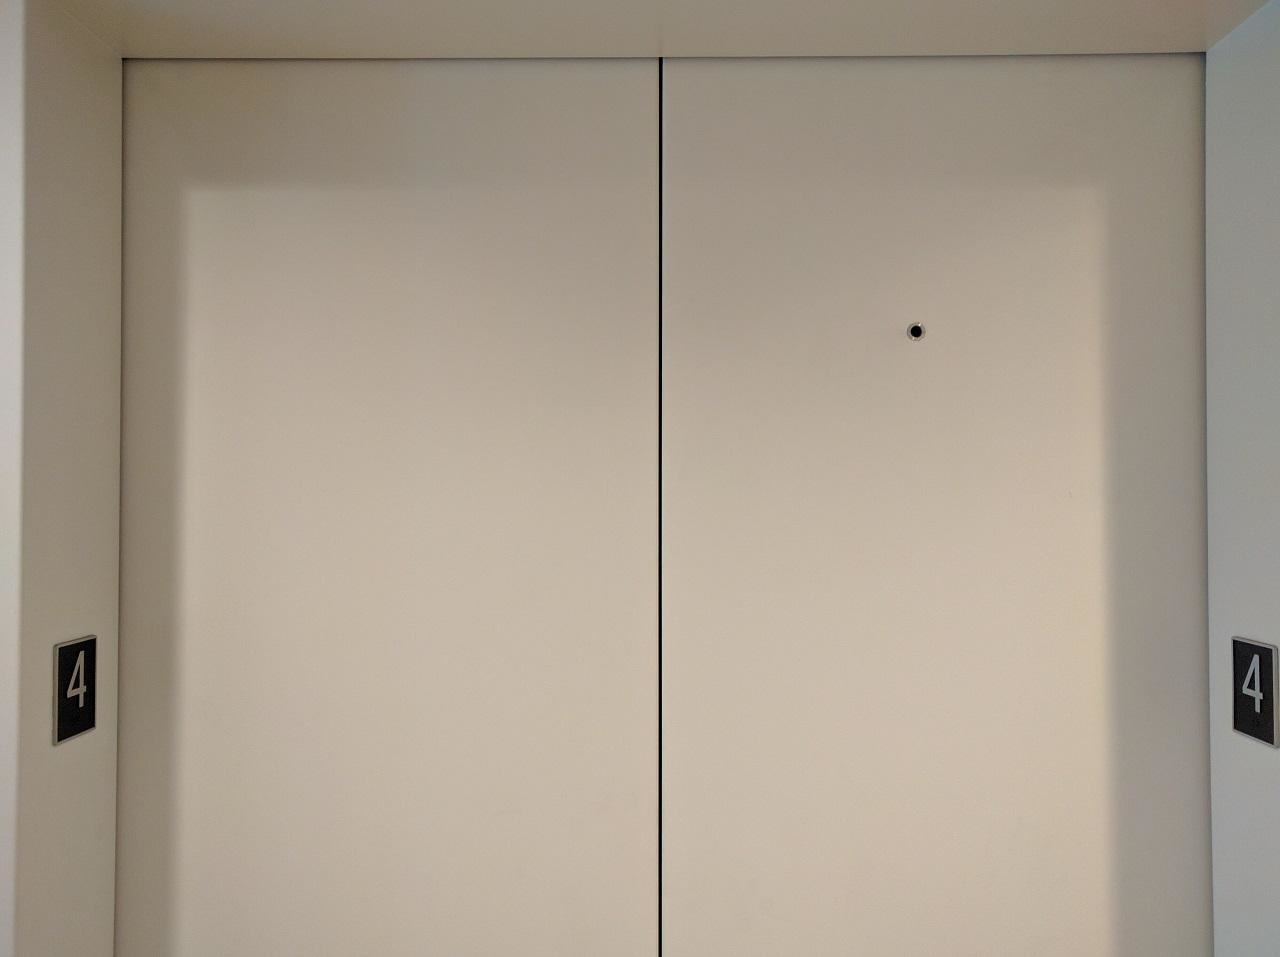 That Tiny Hole On Elevator Doors.
No, it's not there so any perve can take a peek at strangers on the elevator. It's a keyhole that only works for authorized personnel that allows them to enter them safely.